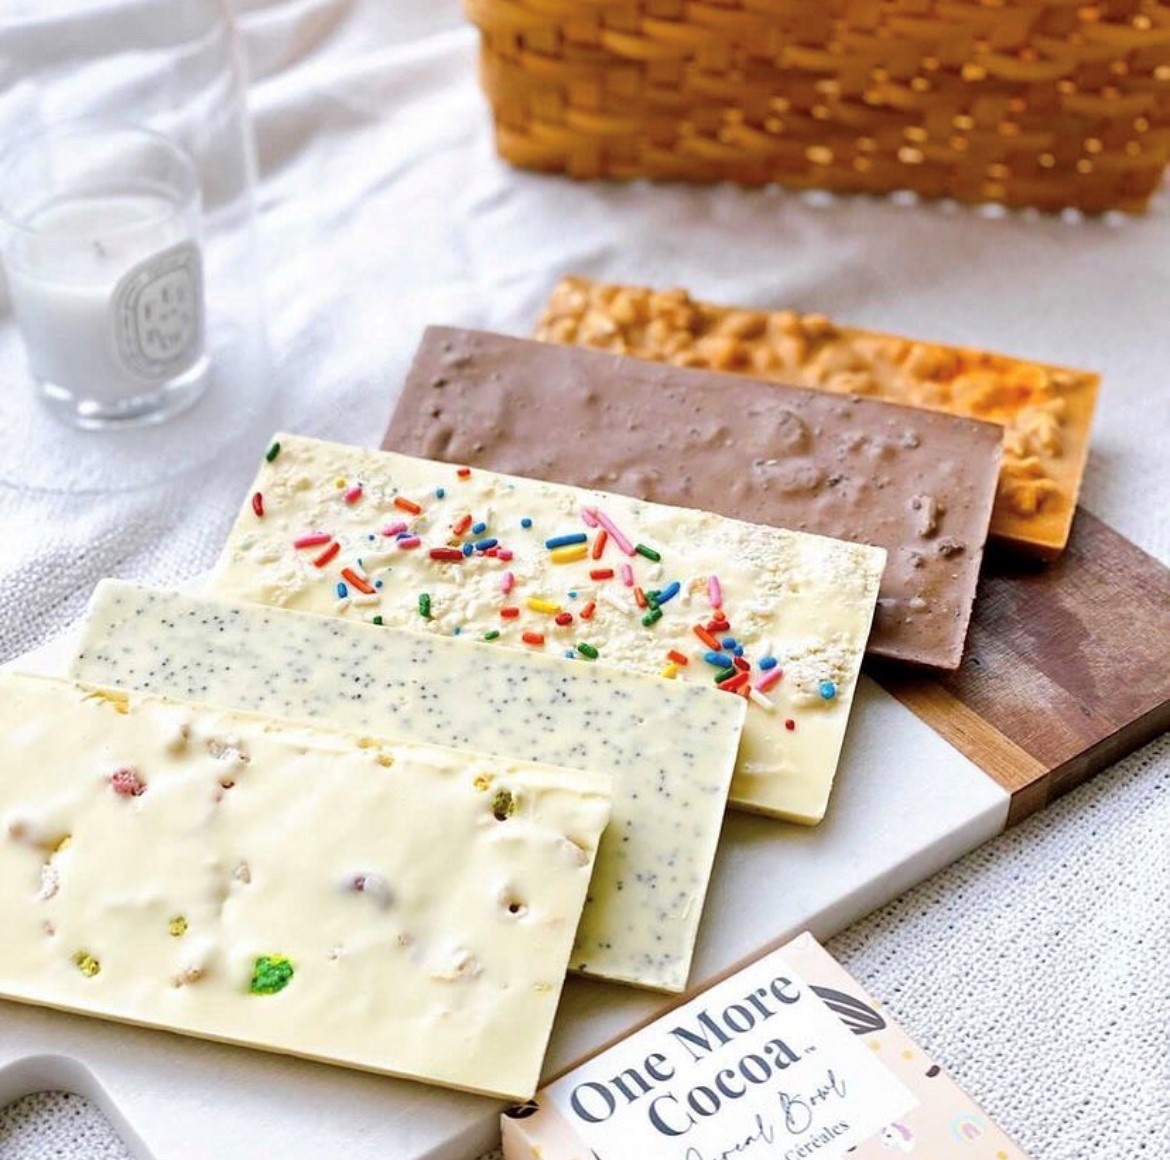 White and dark chocolate bars on a wooden plank